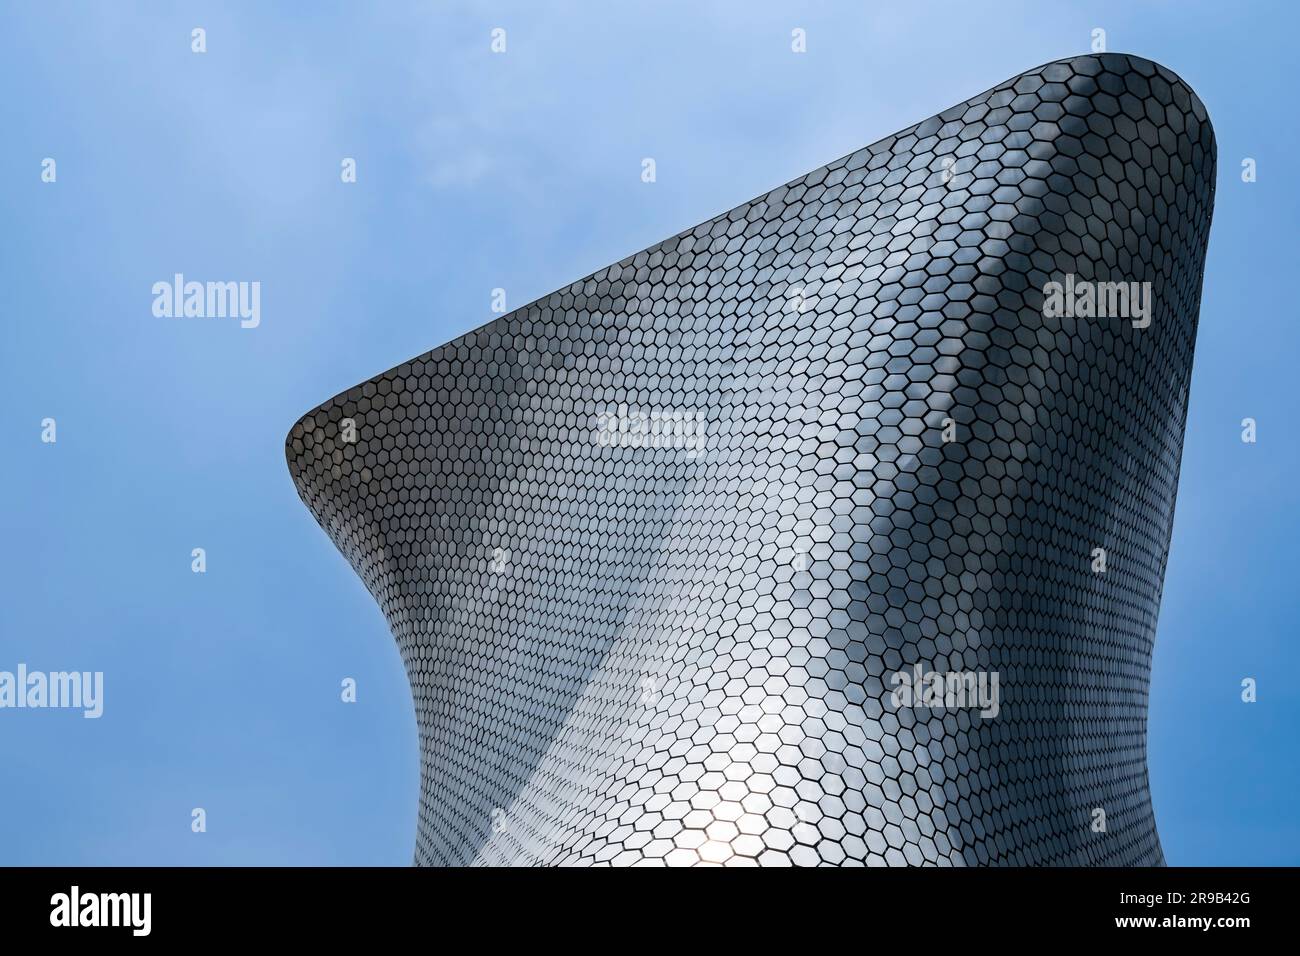 A part of the exterior of the Museo Soumaya in Mexico City, Mexico Stock Photo